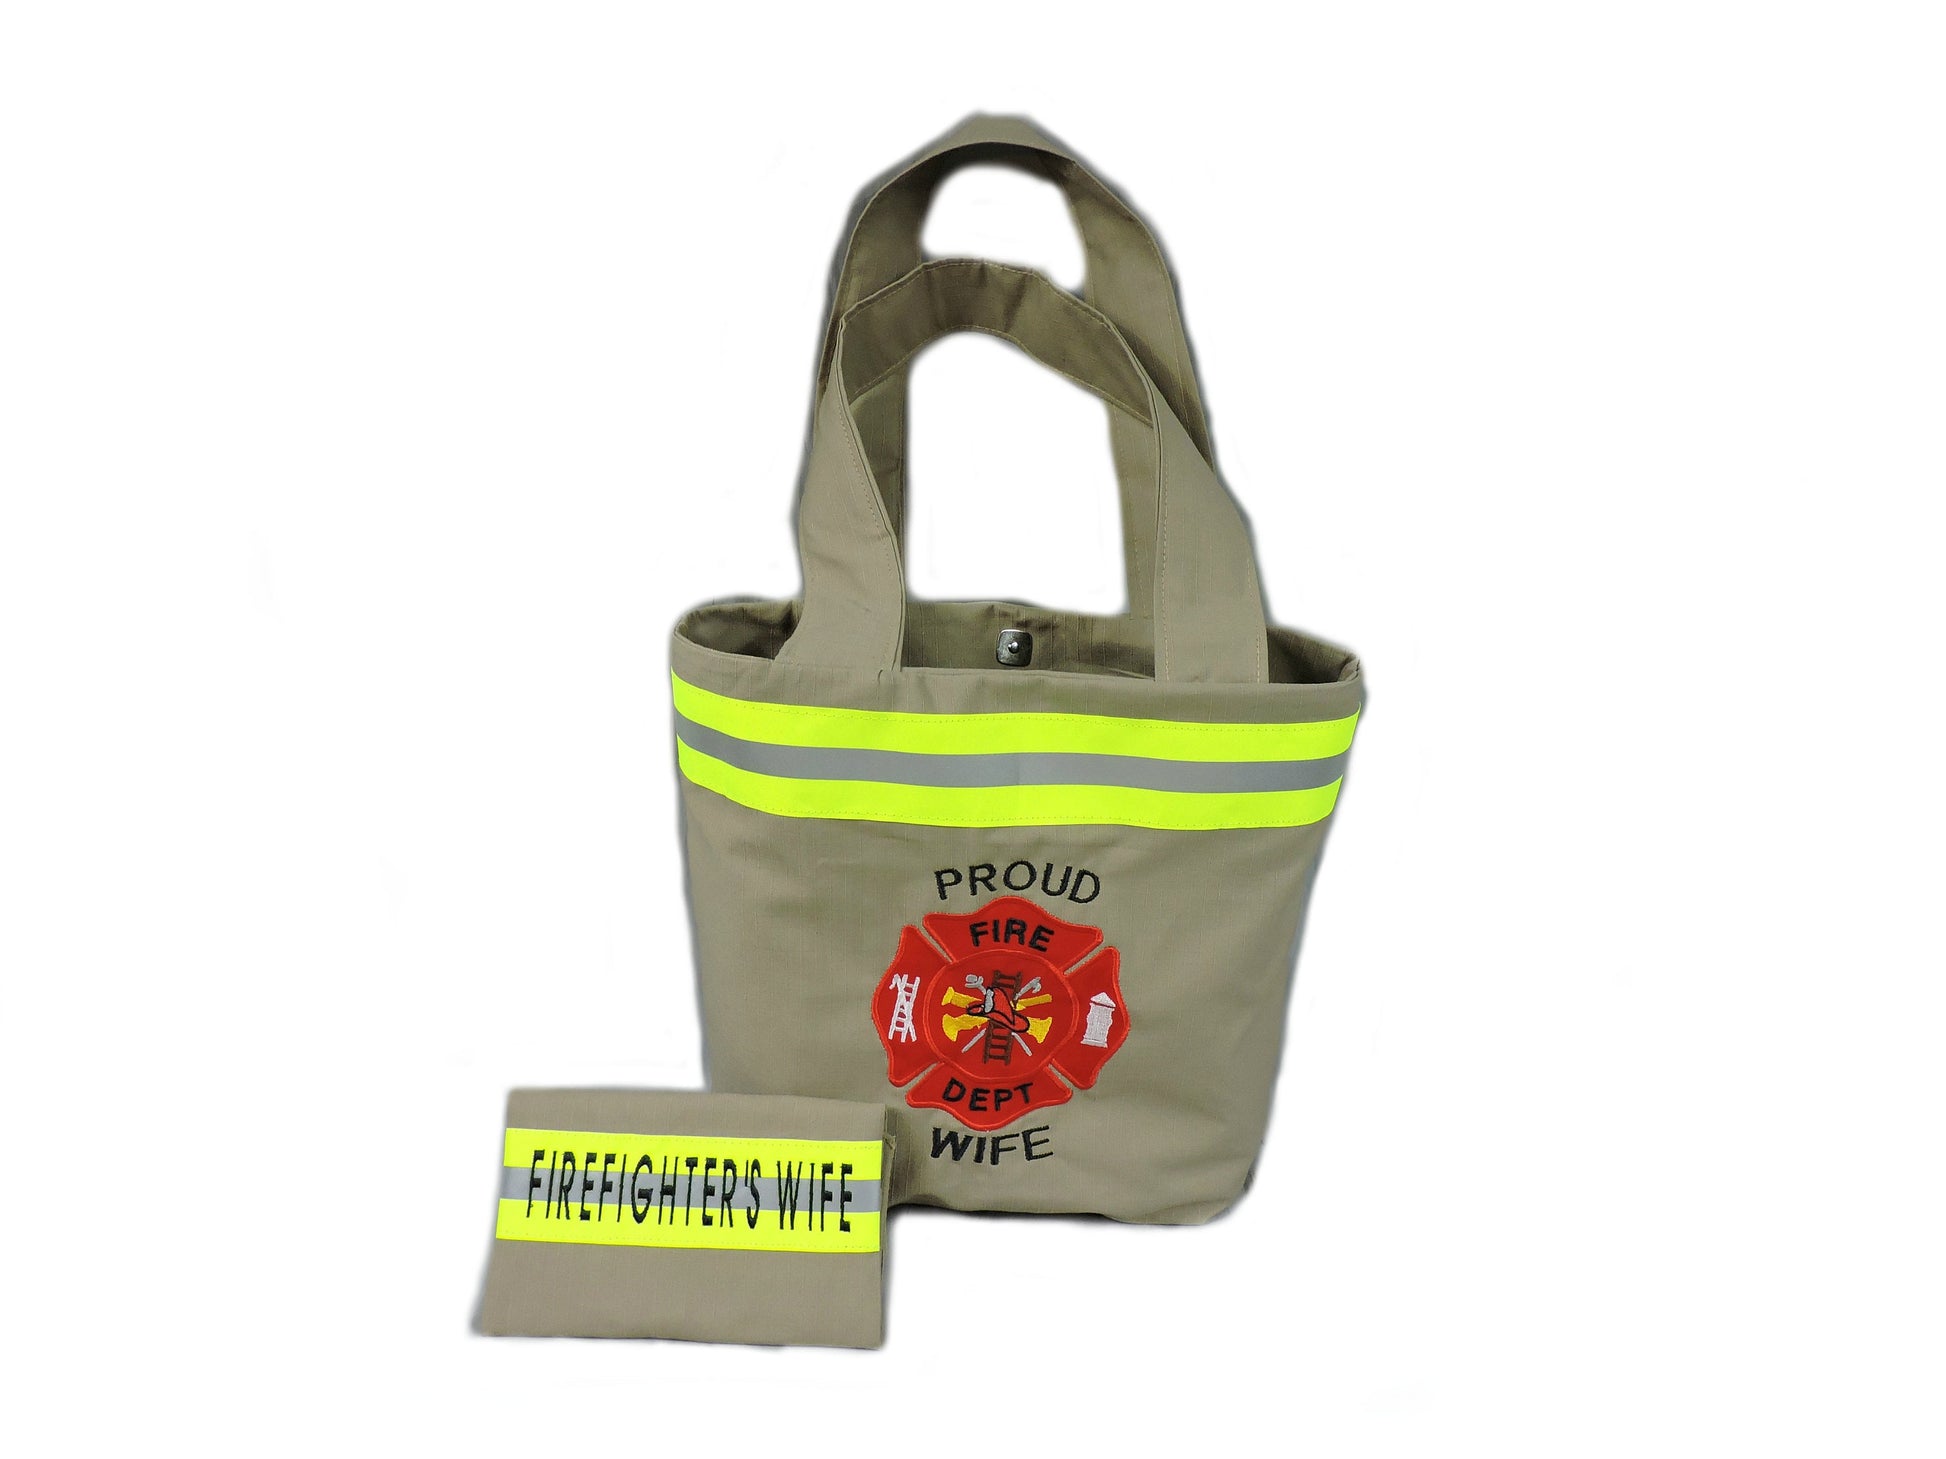 Firefighter Wife Purse and Wallet Set